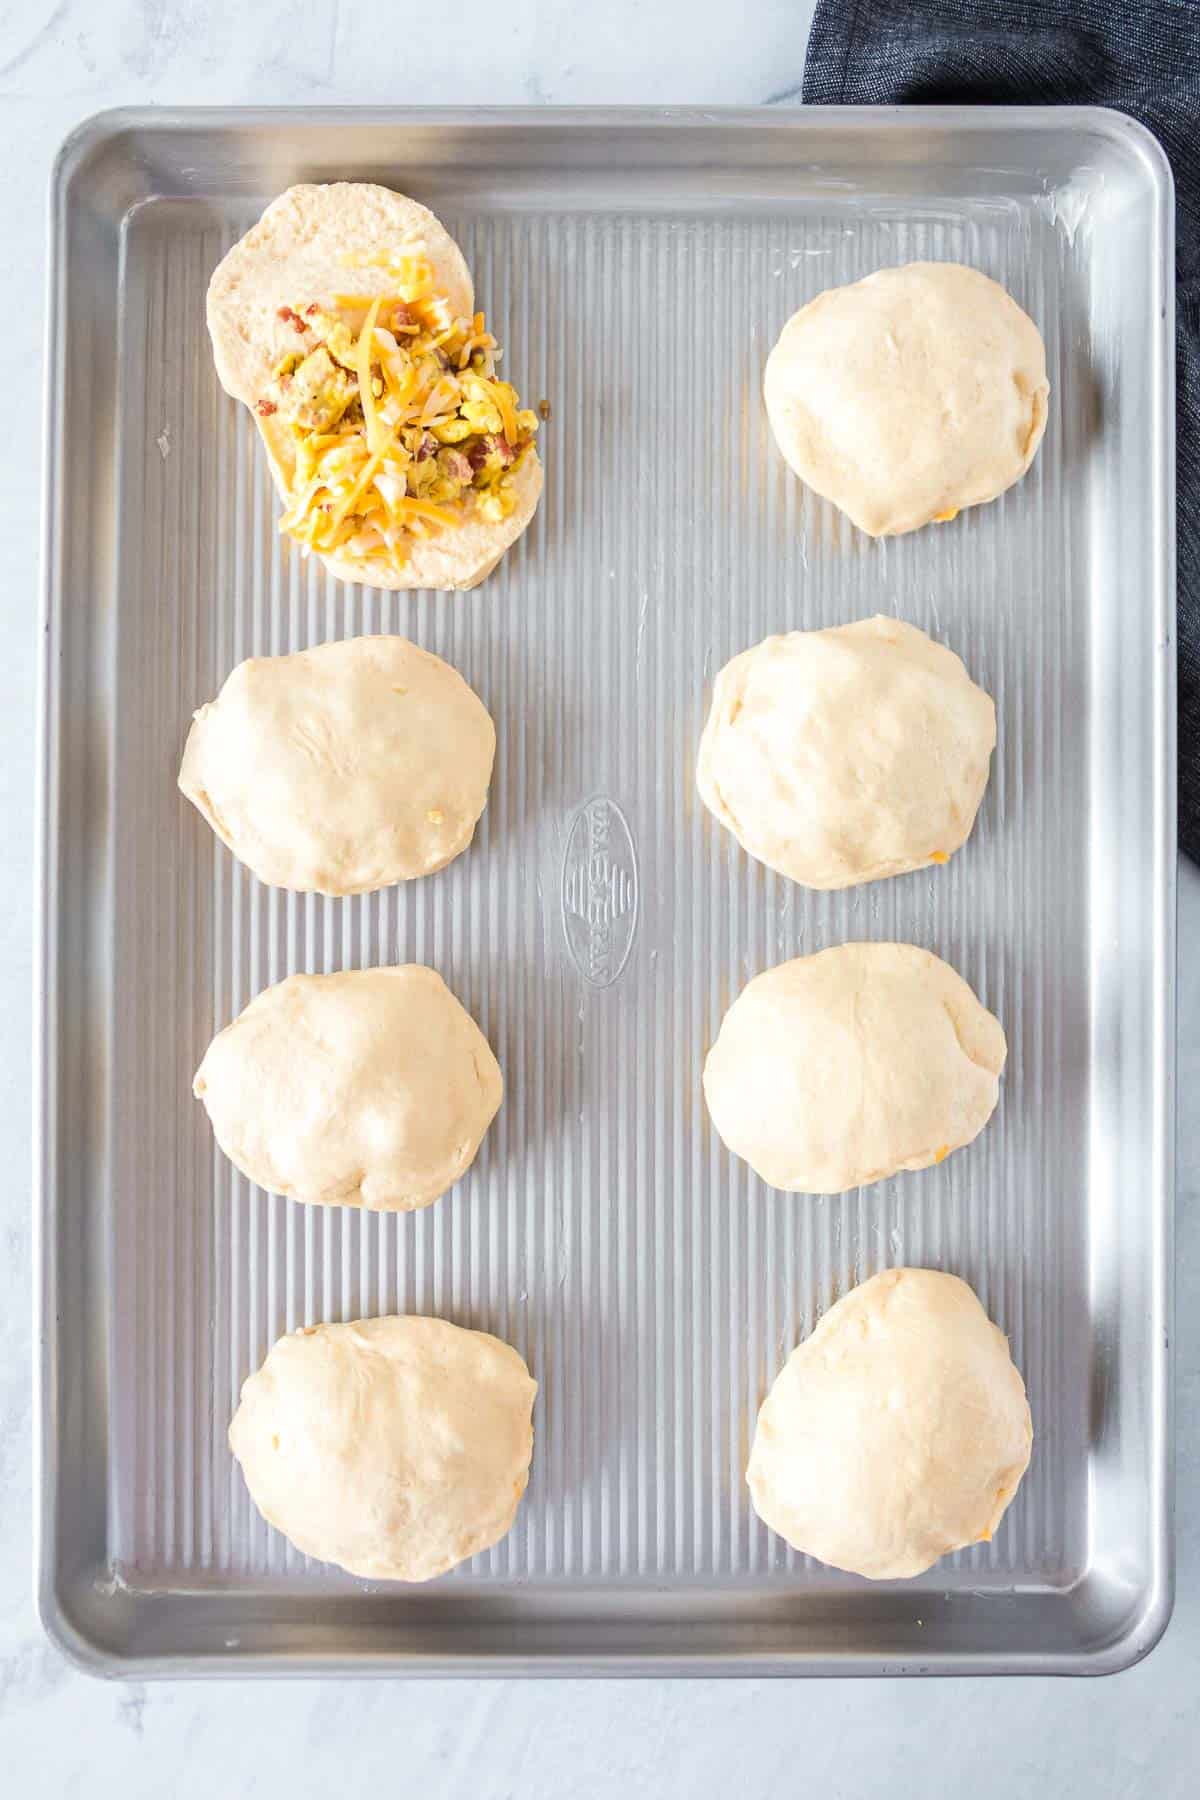 Unbaked biscuits.